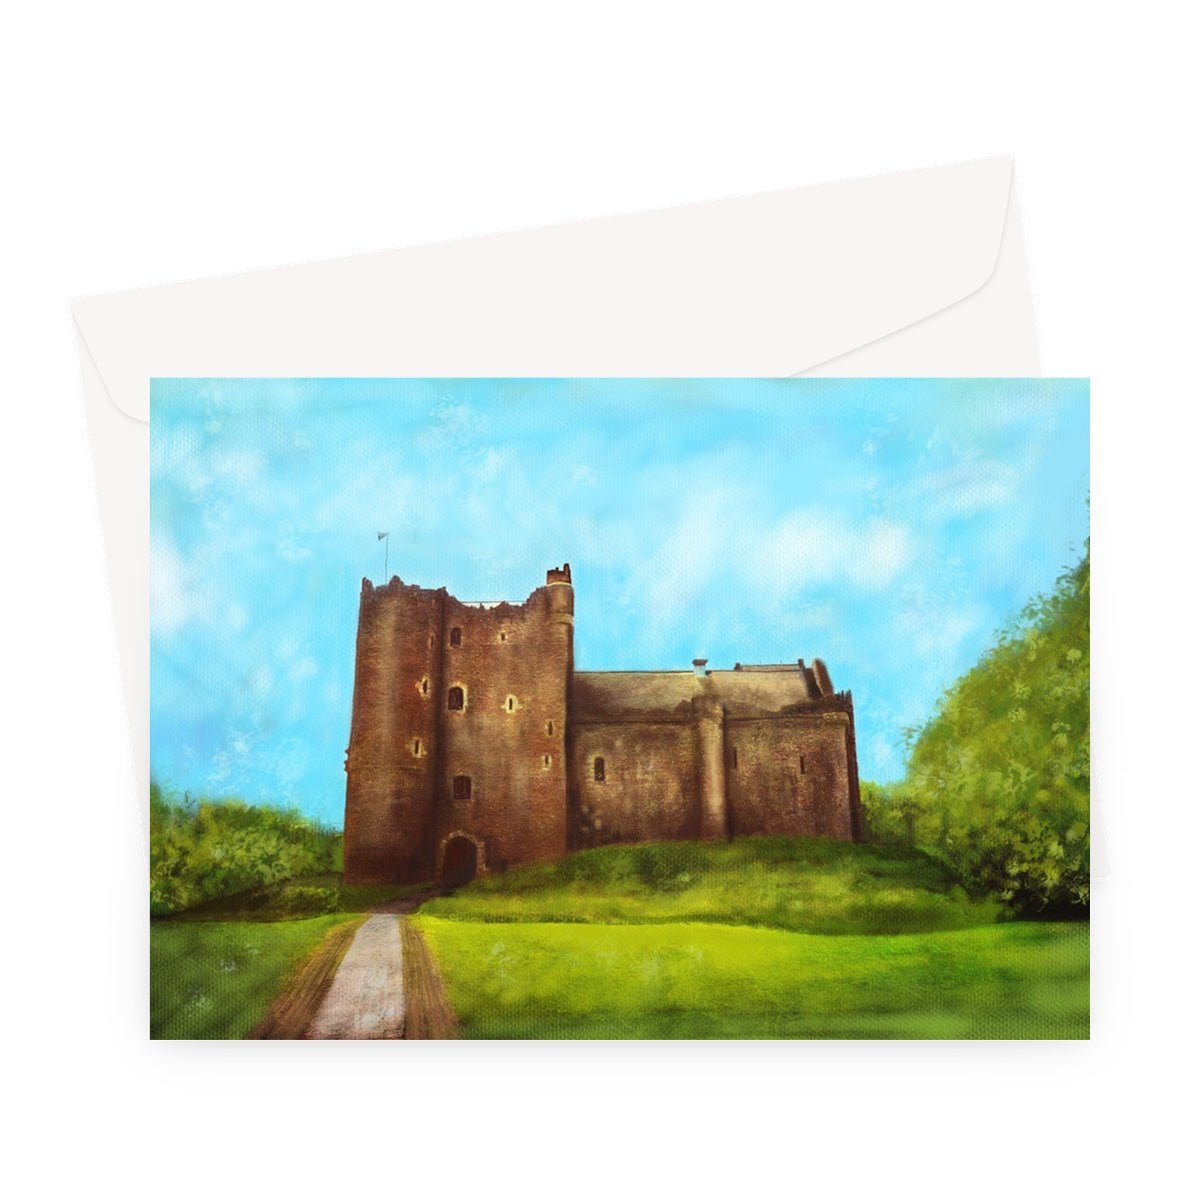 Doune Castle Art Gifts Greeting Card-Greetings Cards-Scottish Castles Art Gallery-A5 Landscape-10 Cards-Paintings, Prints, Homeware, Art Gifts From Scotland By Scottish Artist Kevin Hunter